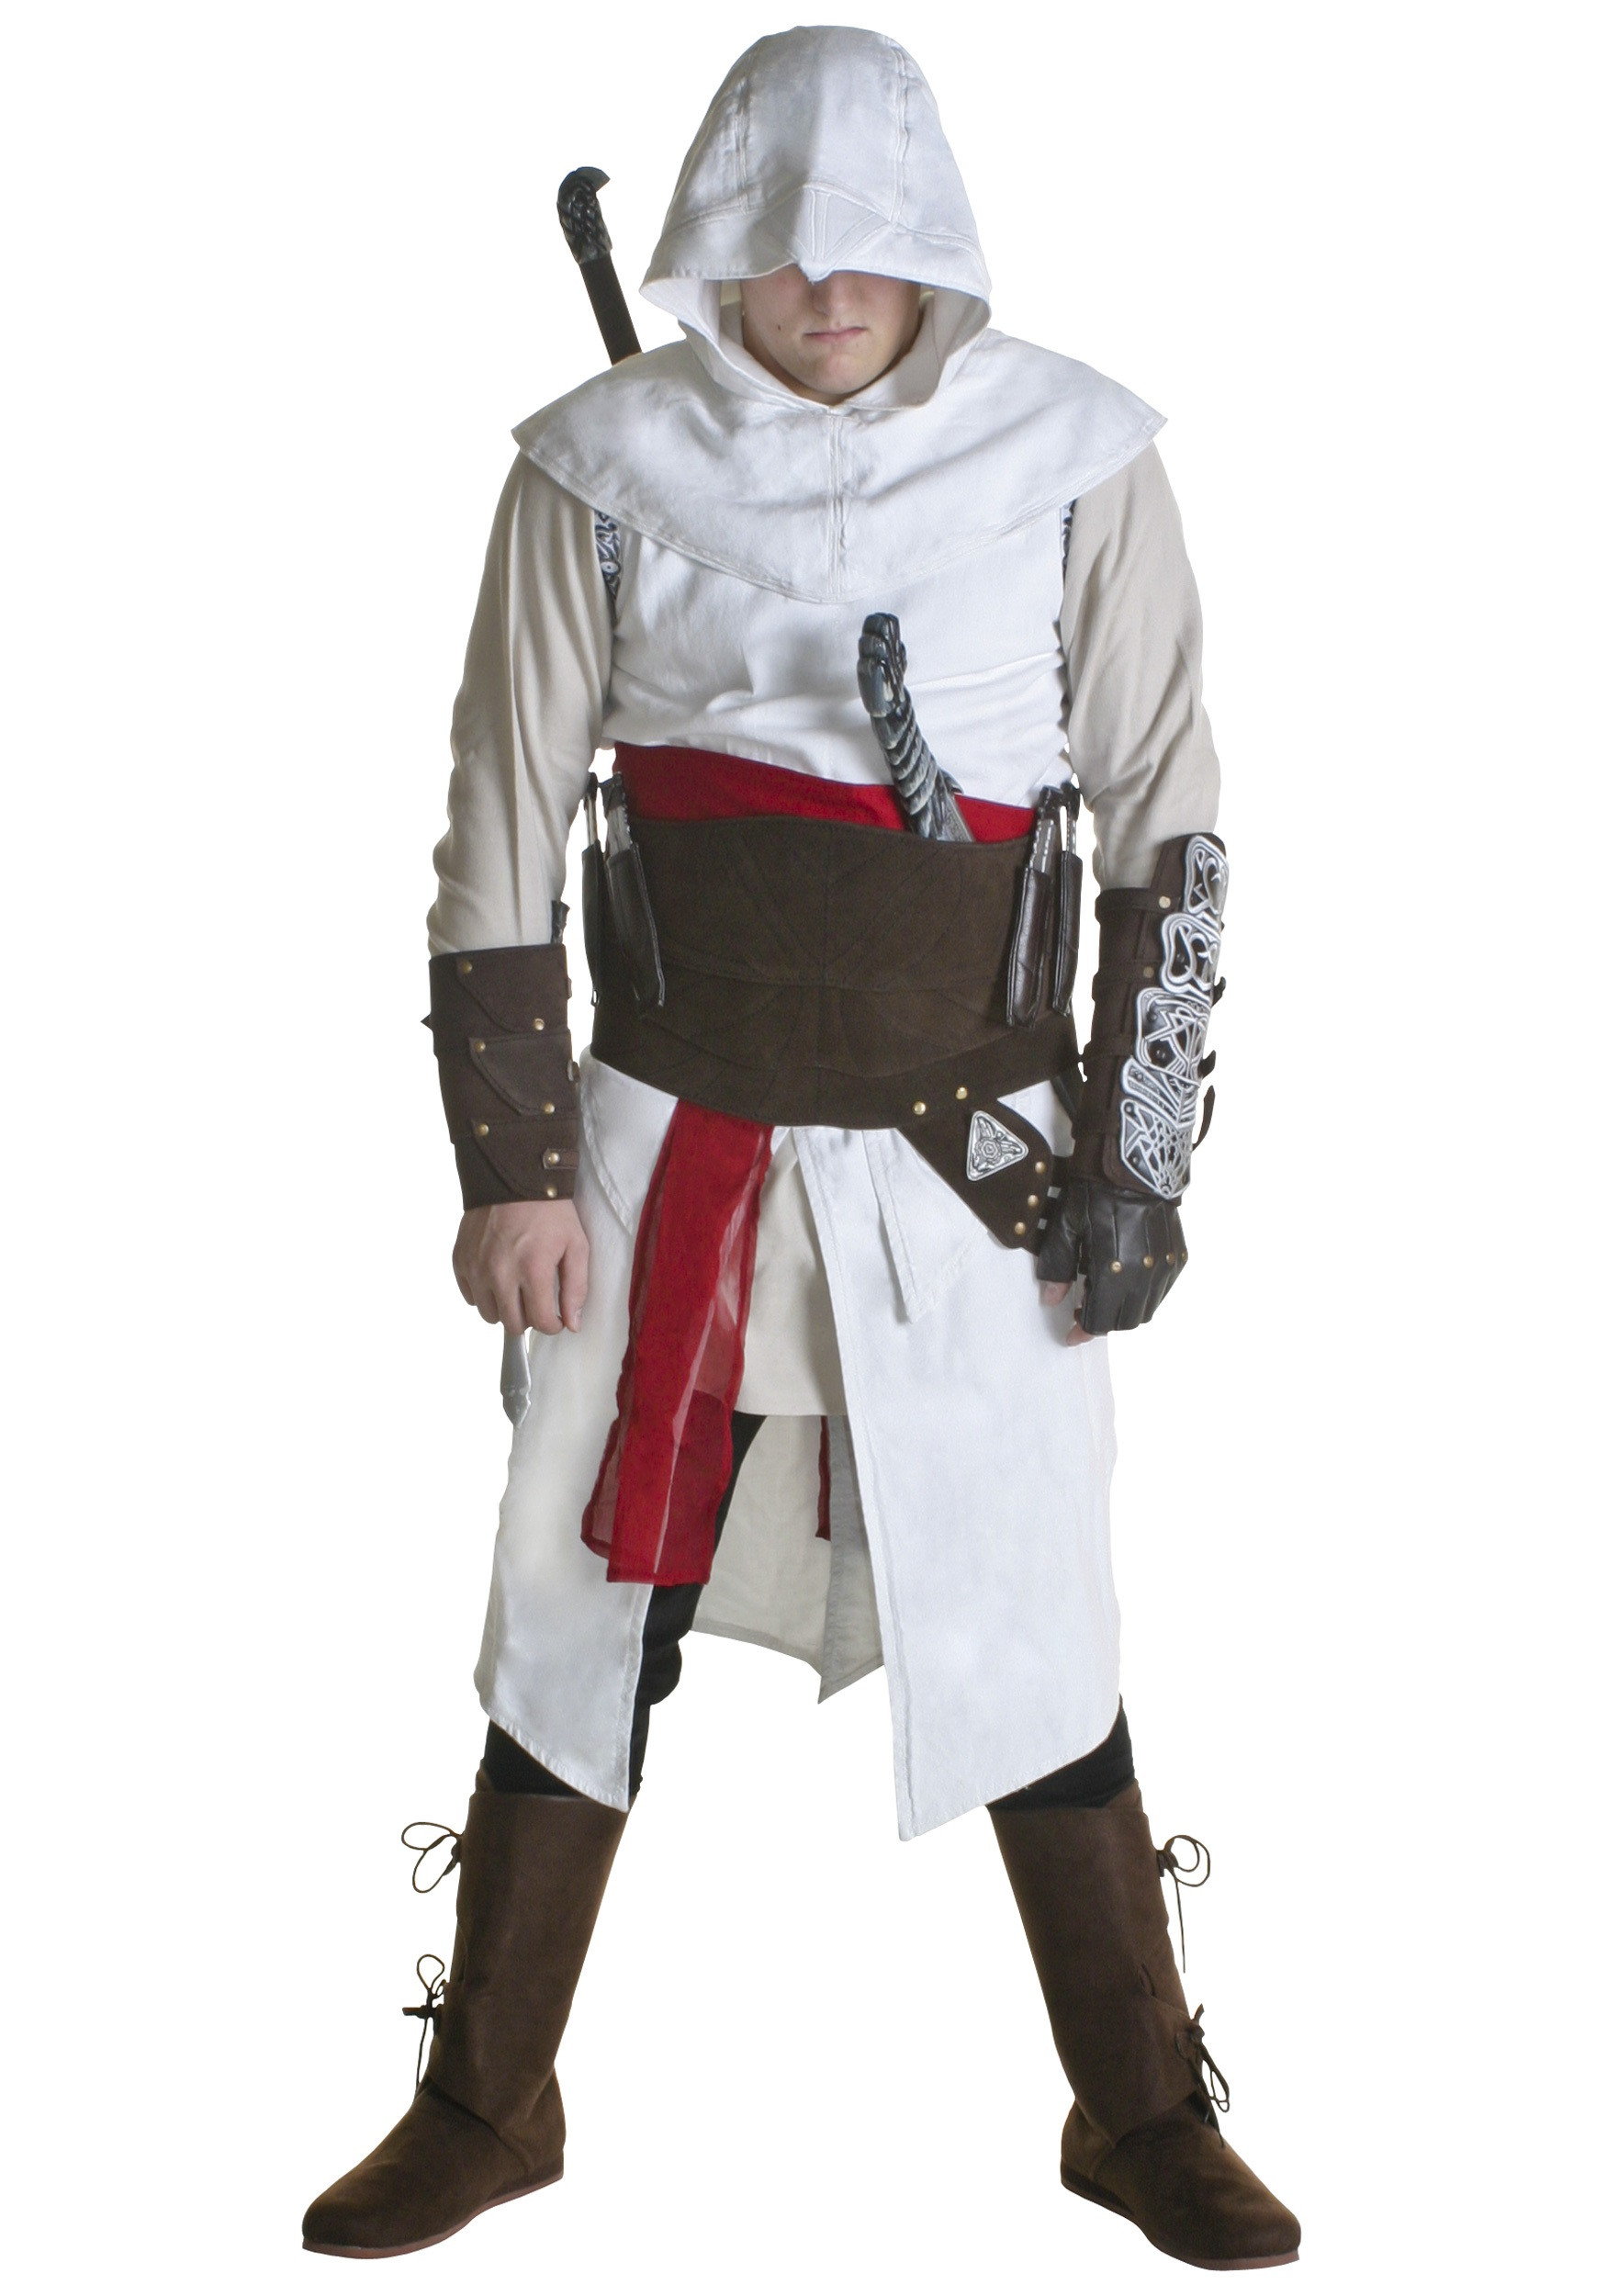 DIY Assassins Creed Costume
 1000 images about Halloween costumes on Pinterest